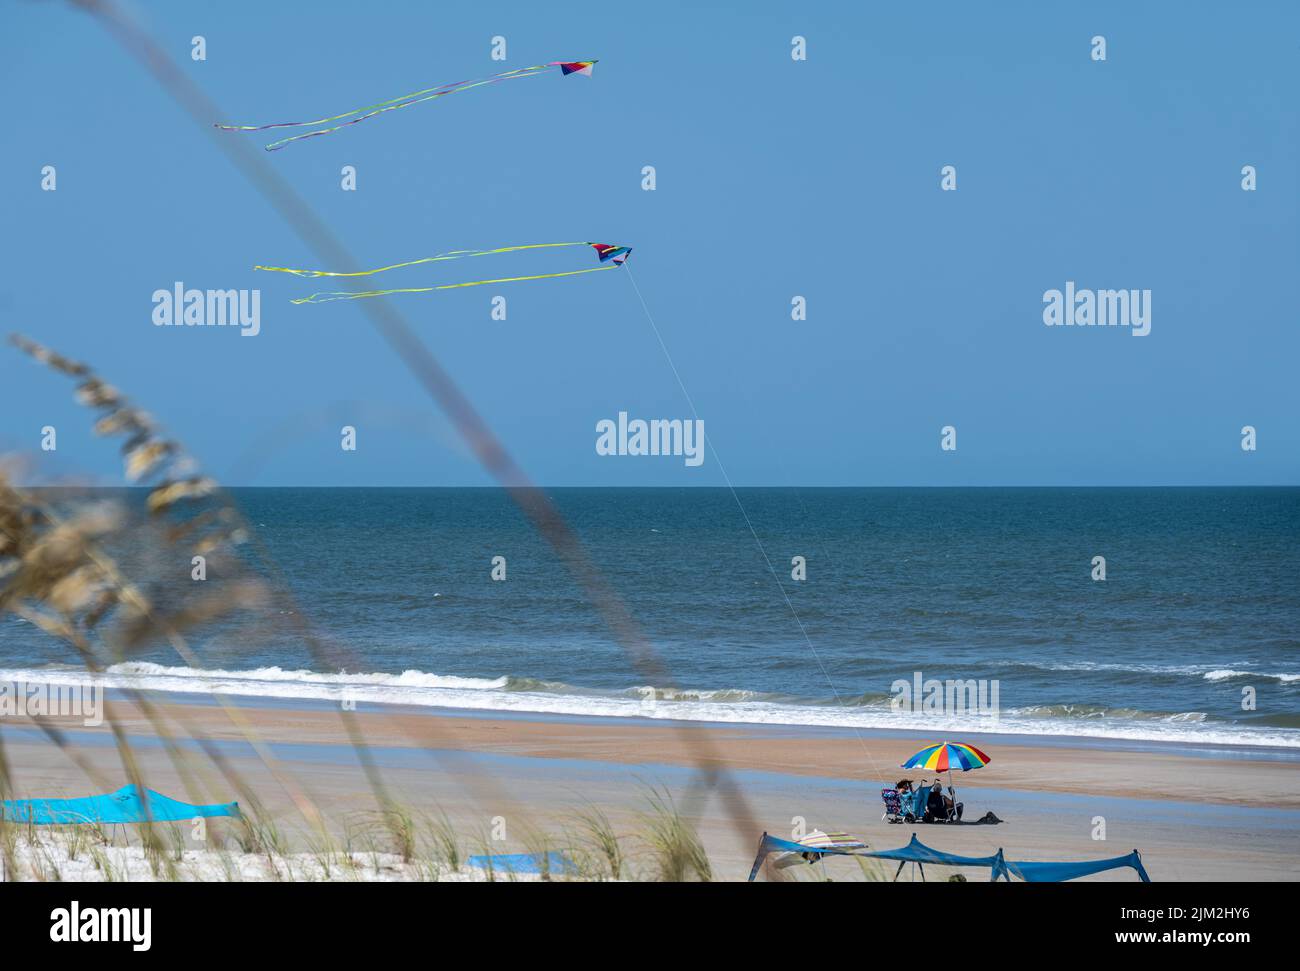 Senior couple enjoying a beautiful day at the beach in St. Augustine, Florida, shaded by a colorful beach umbrella while kites fly overhead. (USA) Stock Photo